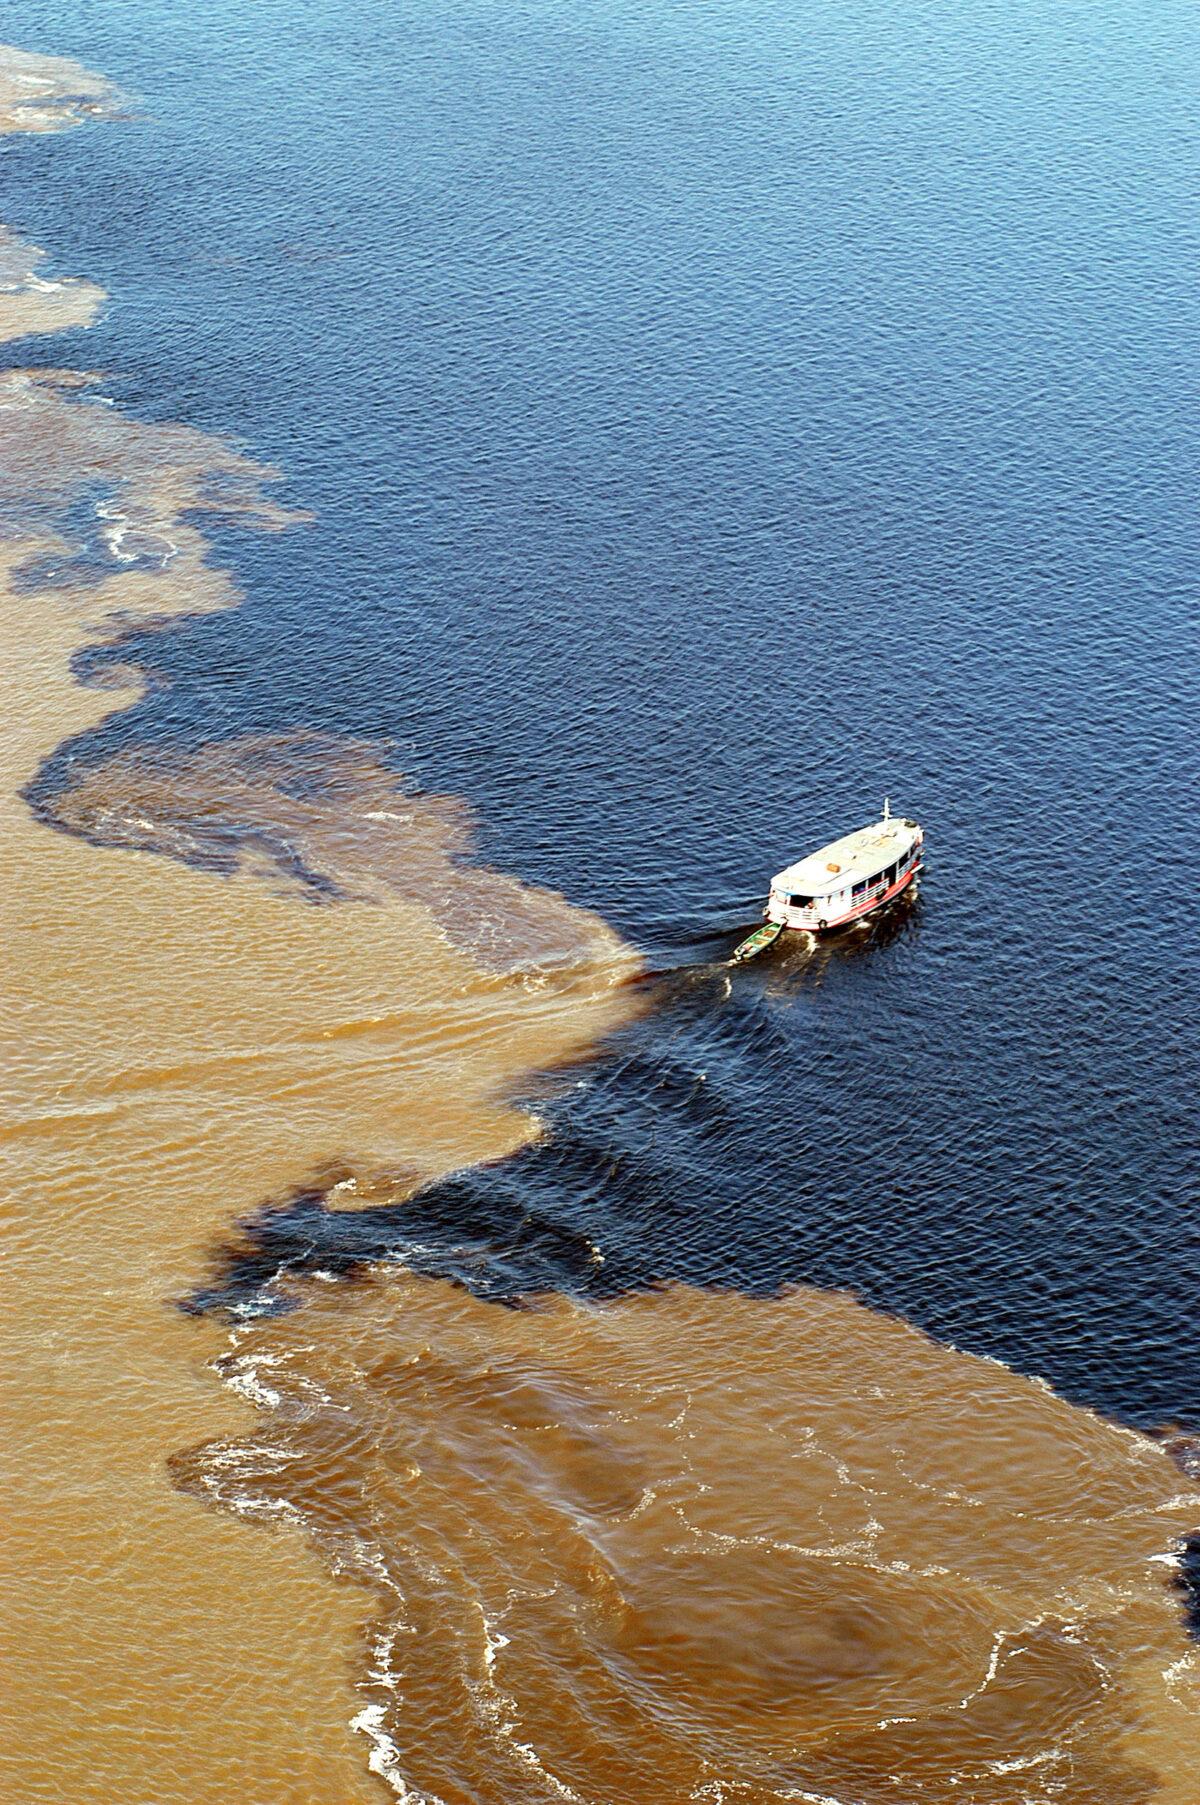 At the Encontro das Águas, “The Meeting of Waters,” the dark Rio Negro meets but doesn’t mix with the sandy-colored Amazon River. (Courtesy of Amazon Nature Tours)